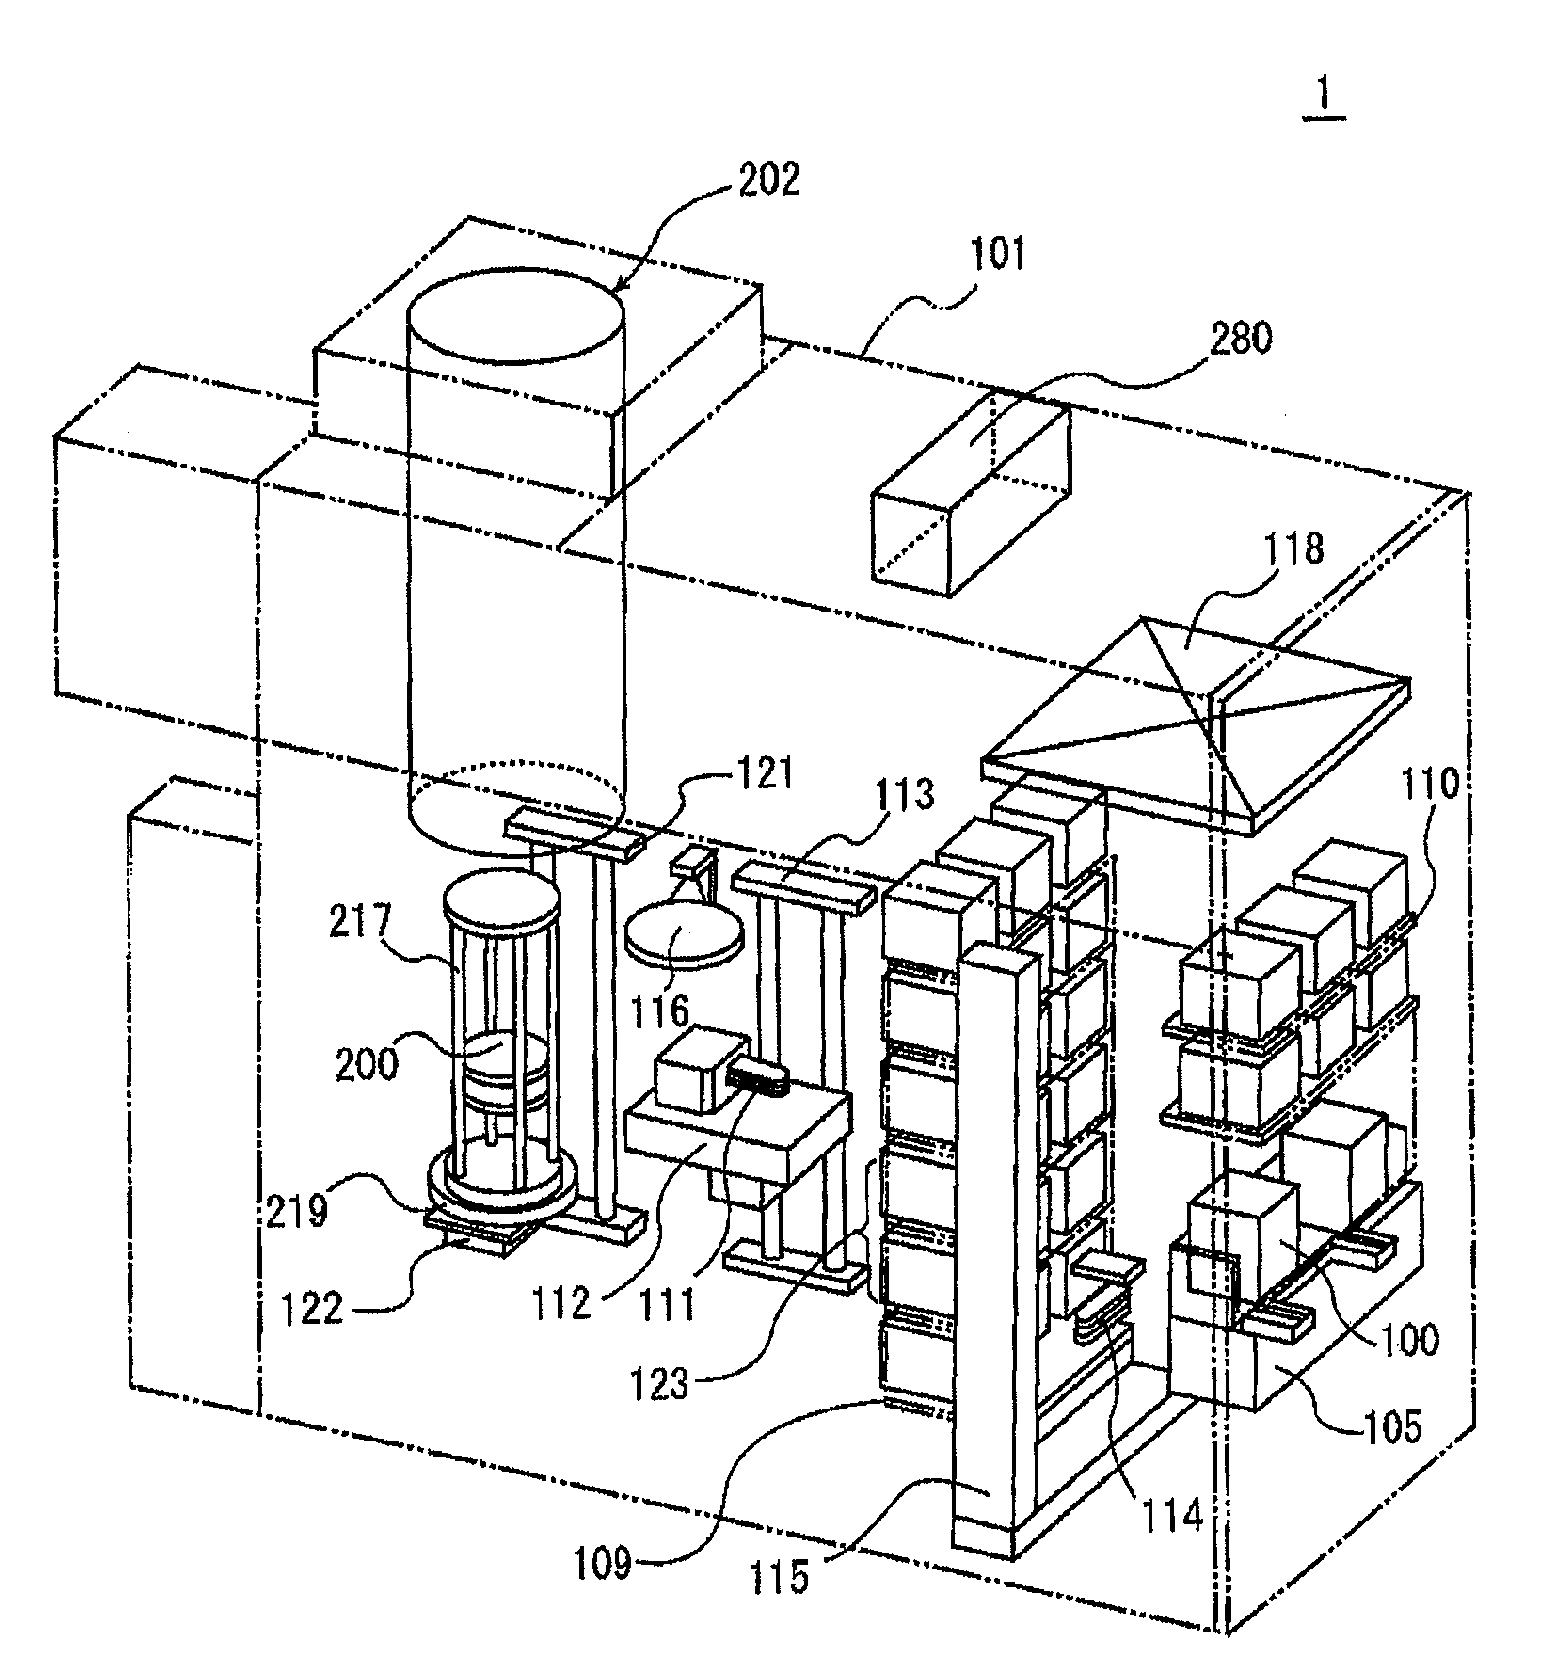 Substrate processing apparatus and method of manufacturing semiconductor device